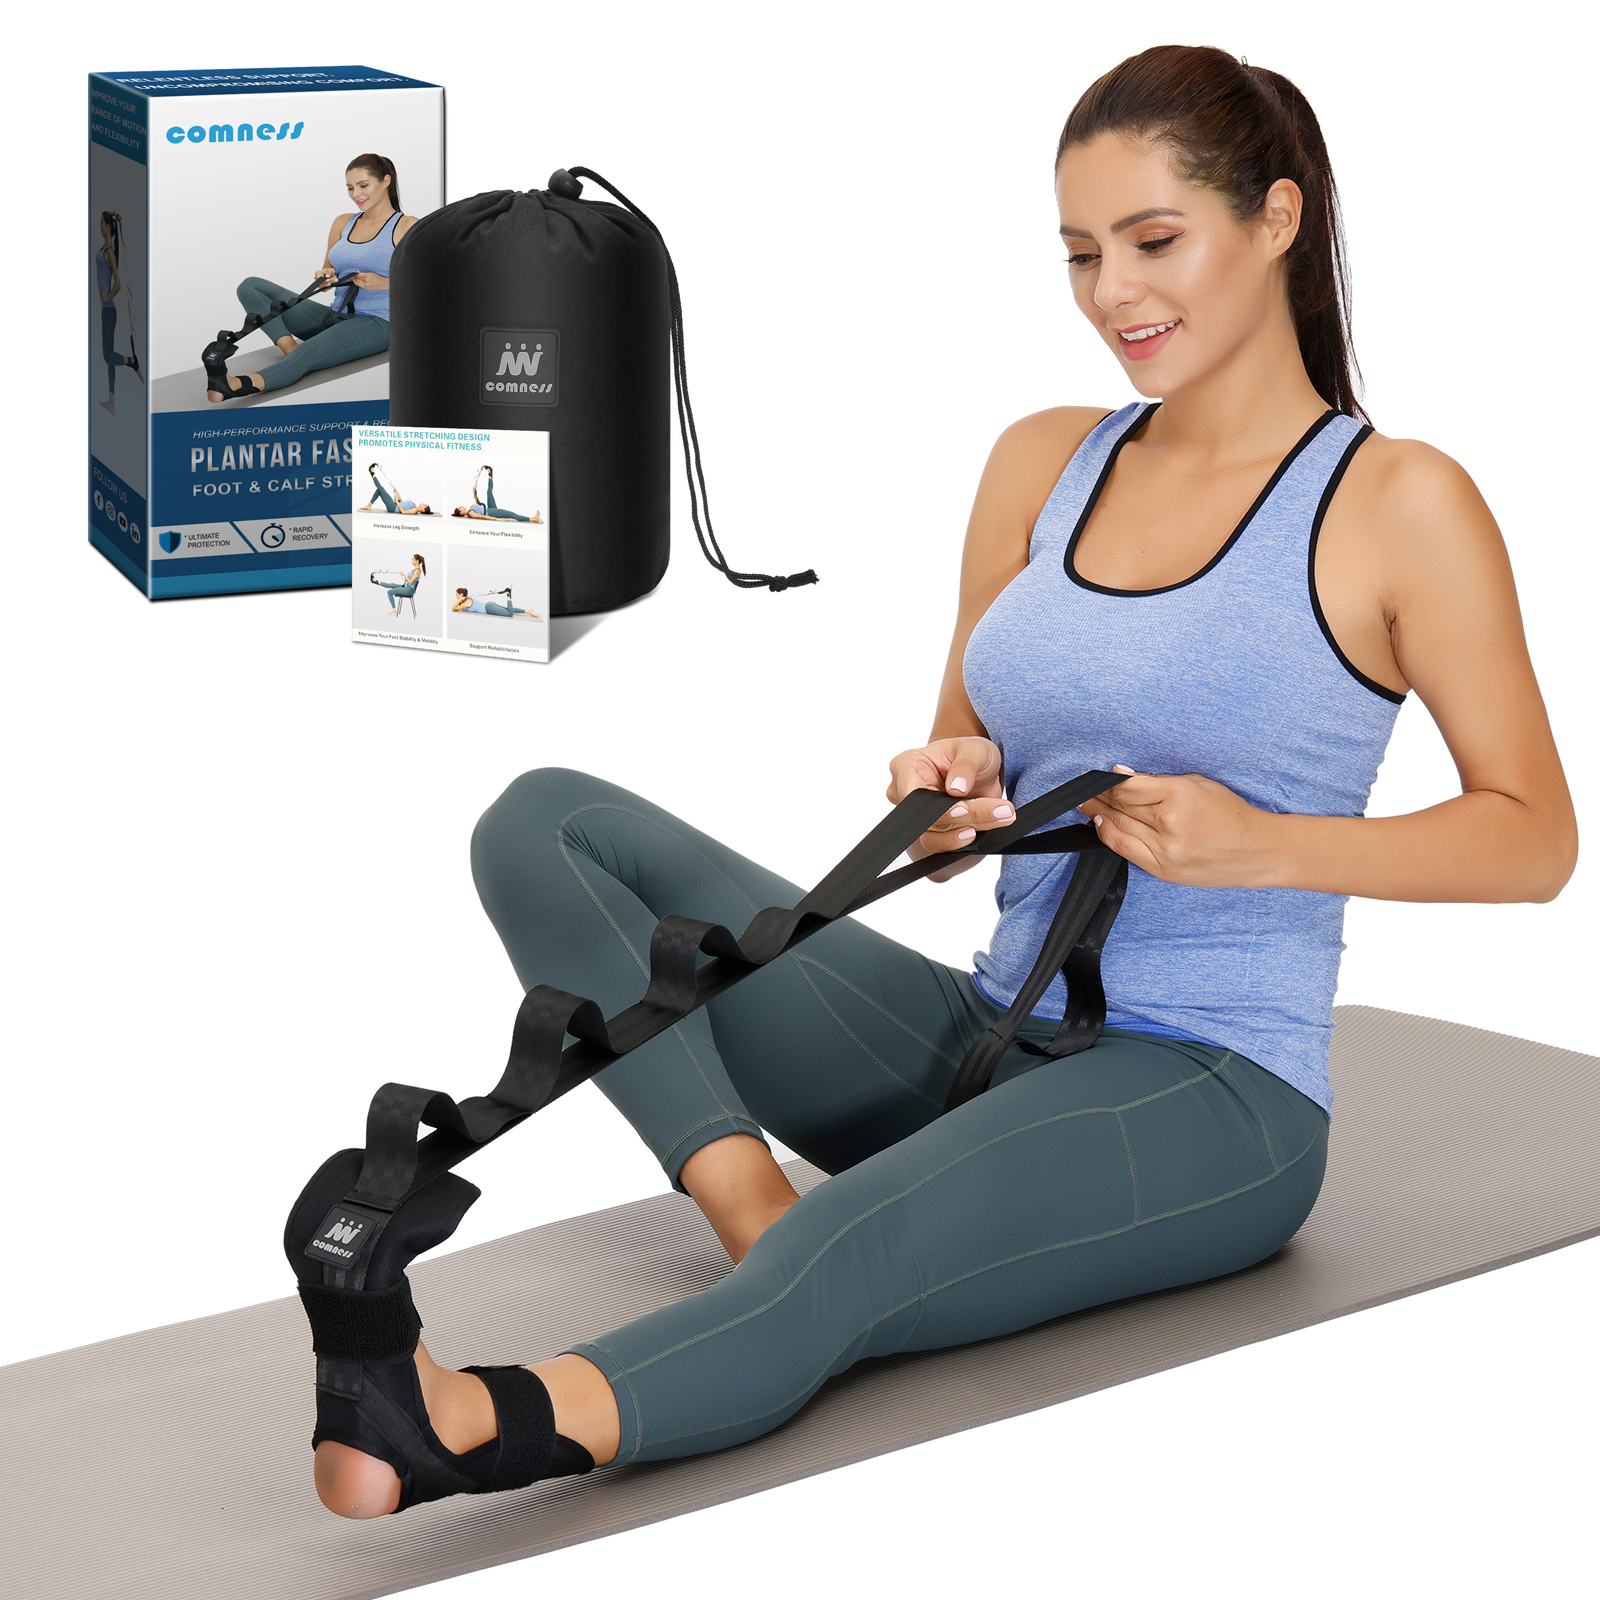 Zenmarkt® Foot Stretcher and Calf Stretcher for Physical Therapy